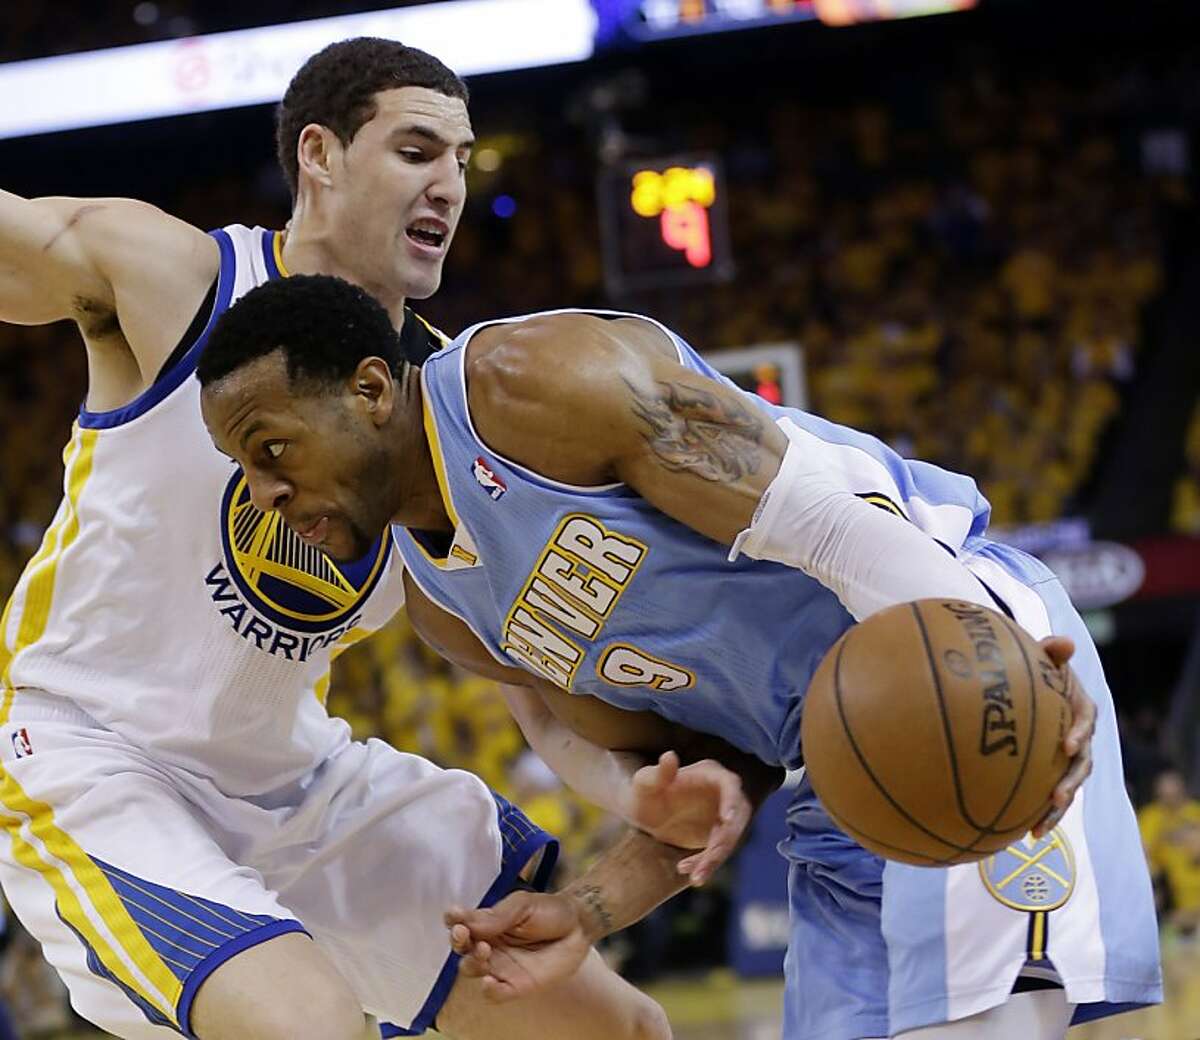 Denver Nuggets' Andre Iguodala, right, is defended by Golden State Warriors' Klay Thompson during the second half of Game 6 in a first-round NBA basketball playoff series in Oakland, Calif., Thursday, May 2, 2013. Golden State won 92-88. (AP Photo/Marcio Jose Sanchez)